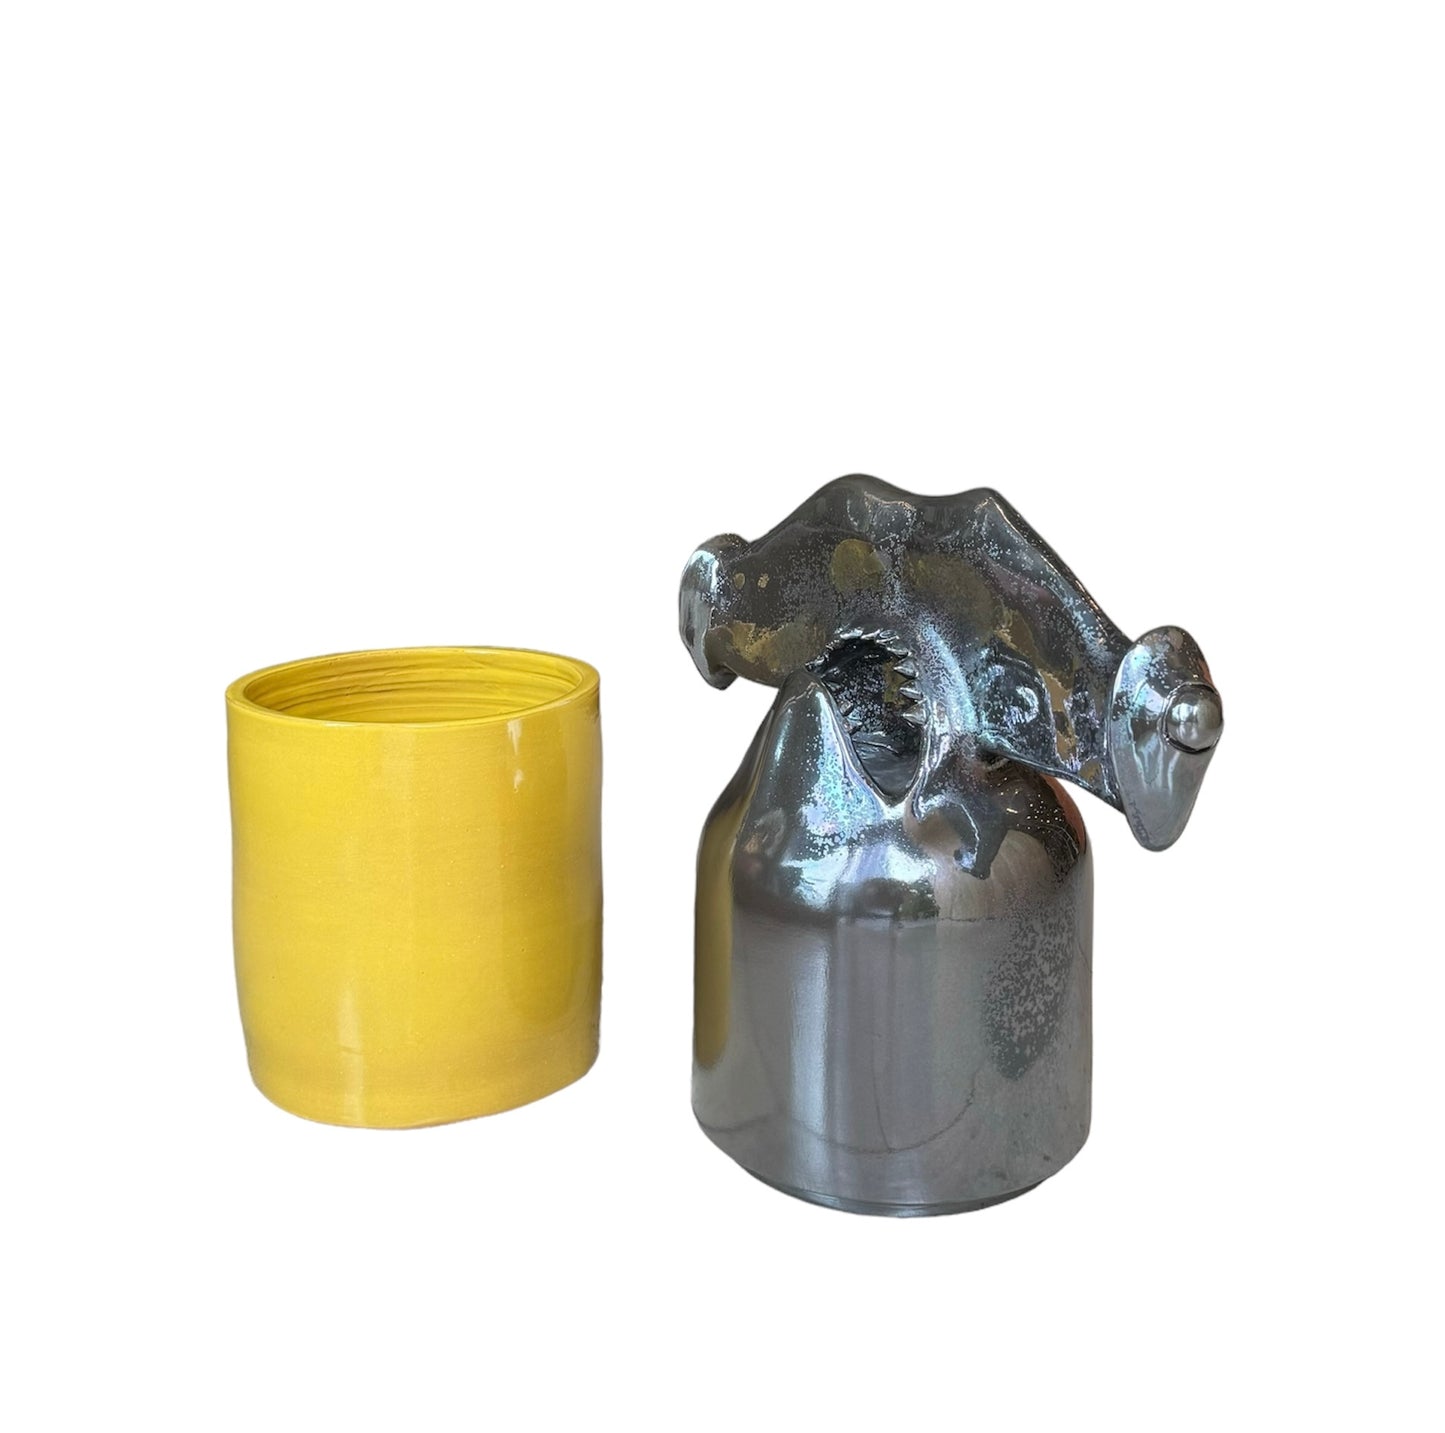 CONTAINER HAMMERHEAD L METALLIC WITH IRIDESCENCE AND YELLOW IN CERAMIC